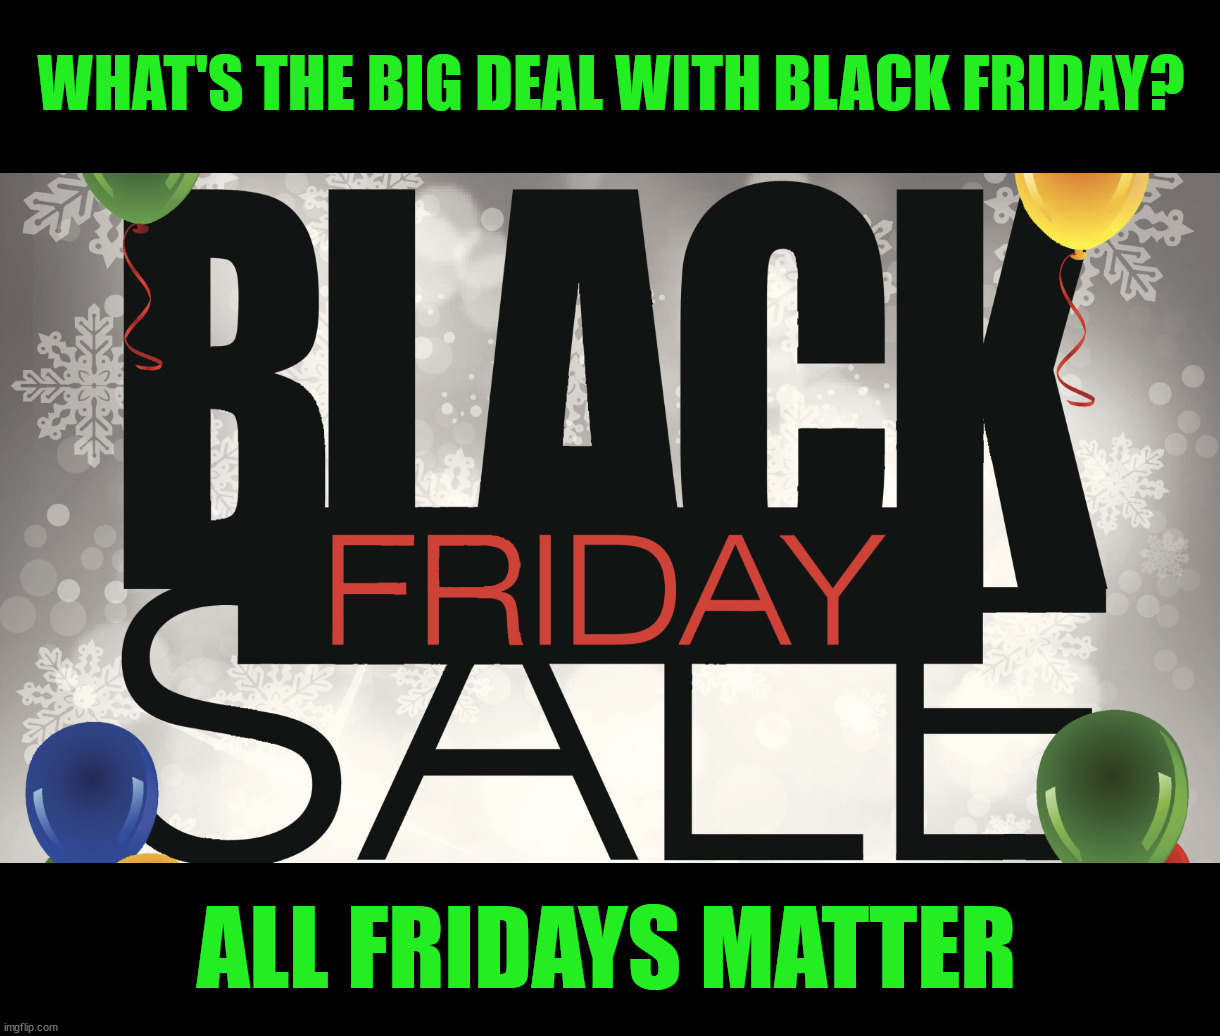 Black Friday |  WHAT'S THE BIG DEAL WITH BLACK FRIDAY? ALL FRIDAYS MATTER | image tagged in black friday,race,blm,shopping,holidays,friday | made w/ Imgflip meme maker